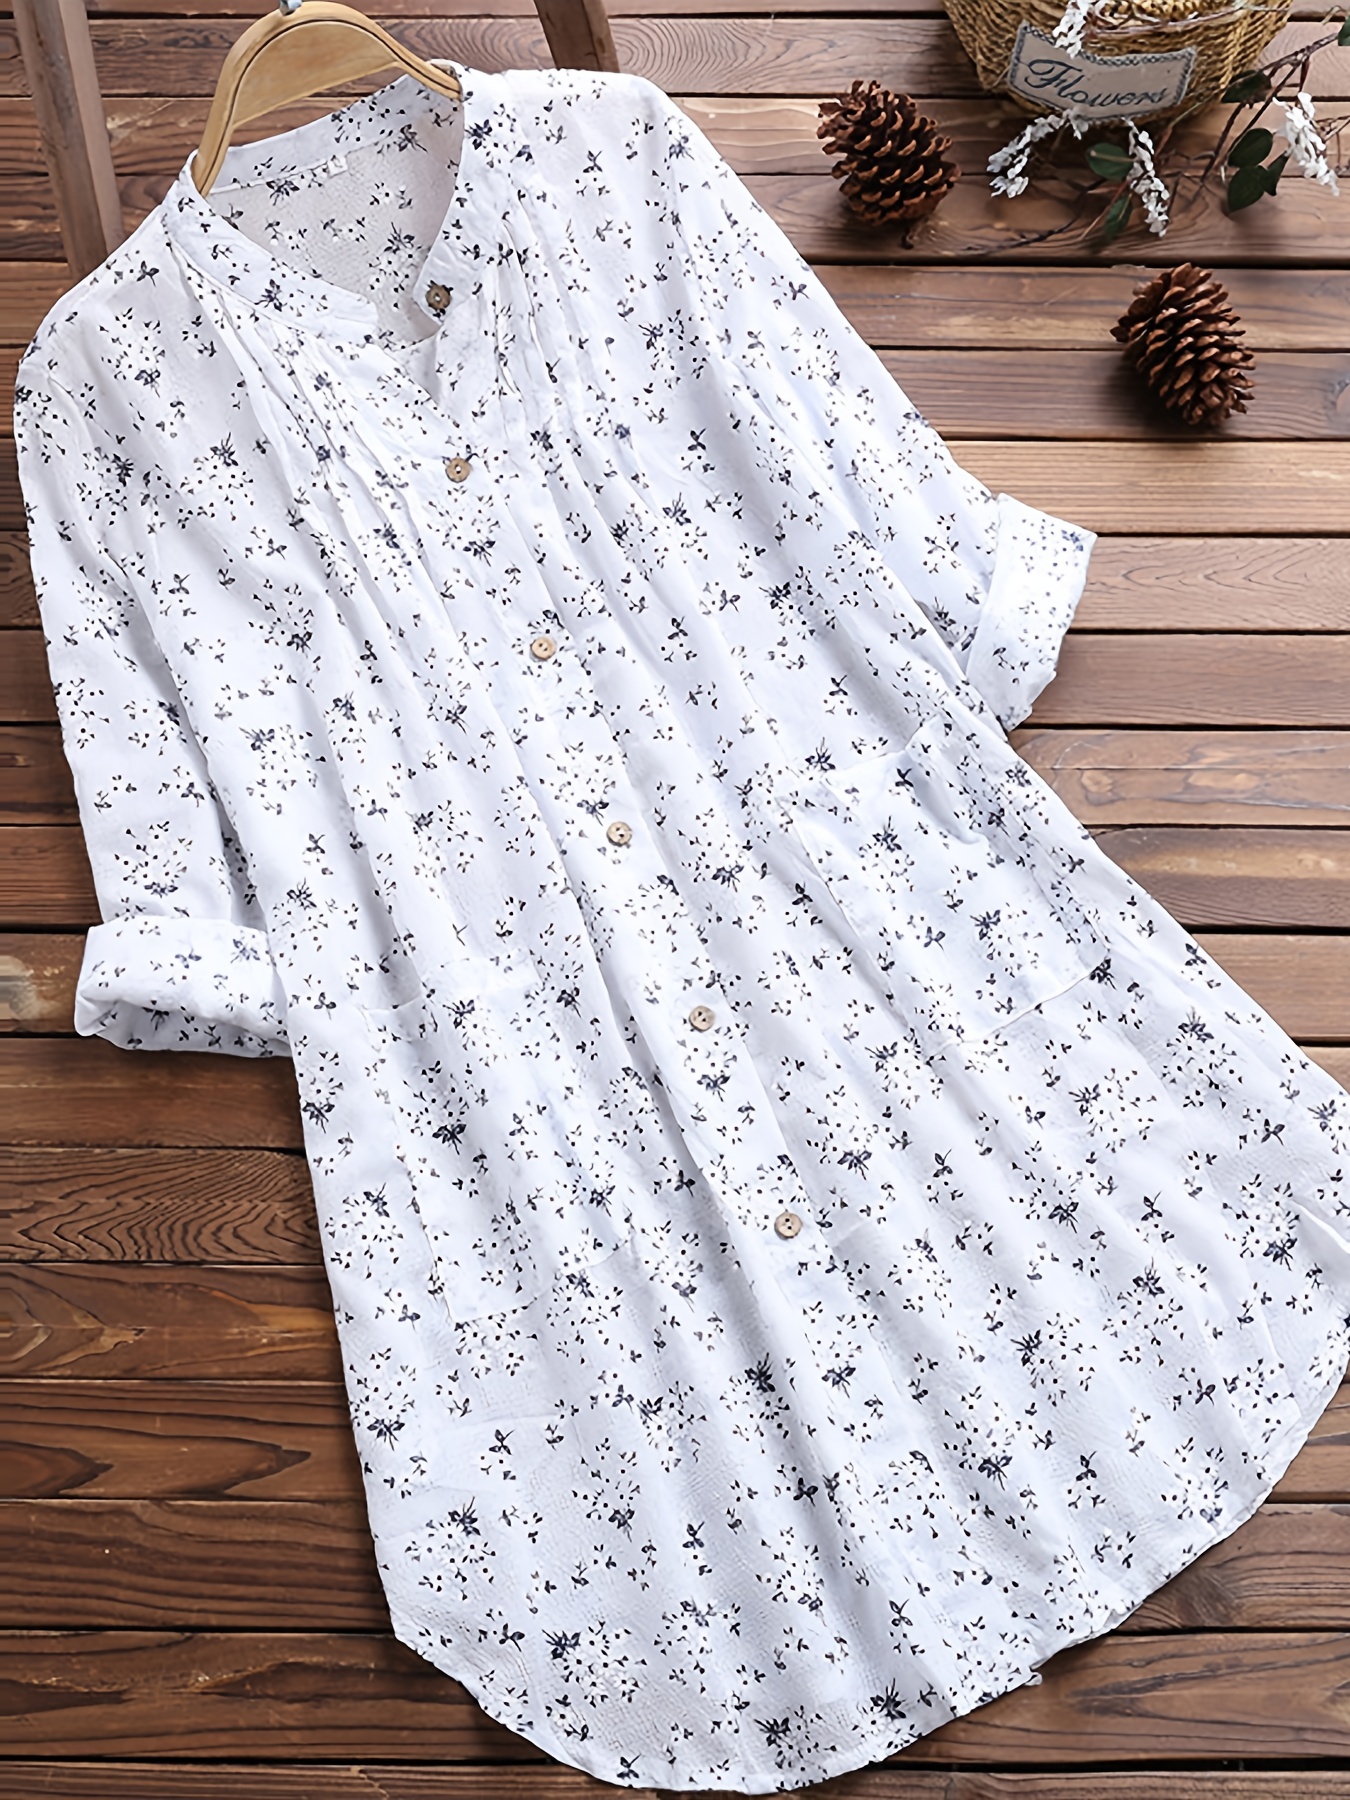 Floral Print V-Neck Long Blouses, T-Shirt, Women's Pleated Casual Loose Button Down Long Sleeve Fashion Long Women's Clothing Tops Shirts,Chic